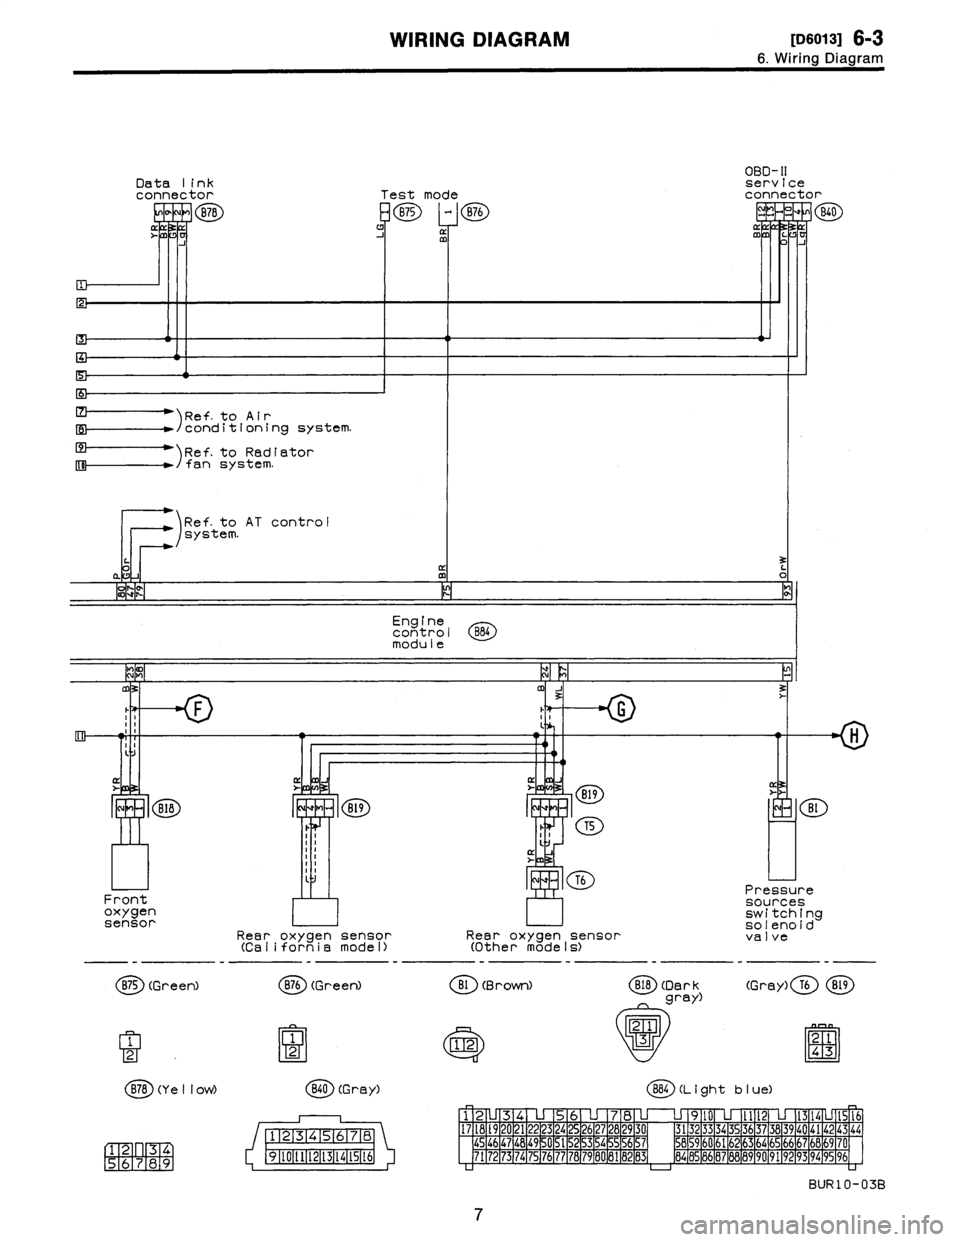 SUBARU LEGACY 1996  Service Repair Manual 
WIRING
DIAGRAM
[D6013]
6-3

6
.
Wiring
Diagram

Data
link
connector
Testmode

878B75
~
B76

YJ
J
~mm
L
J

)
Ref
.
toAir
/
conditioning
system
.

1
Re
f
.to
Radiator
/
fan
system
.

Ref
.
toAT
control